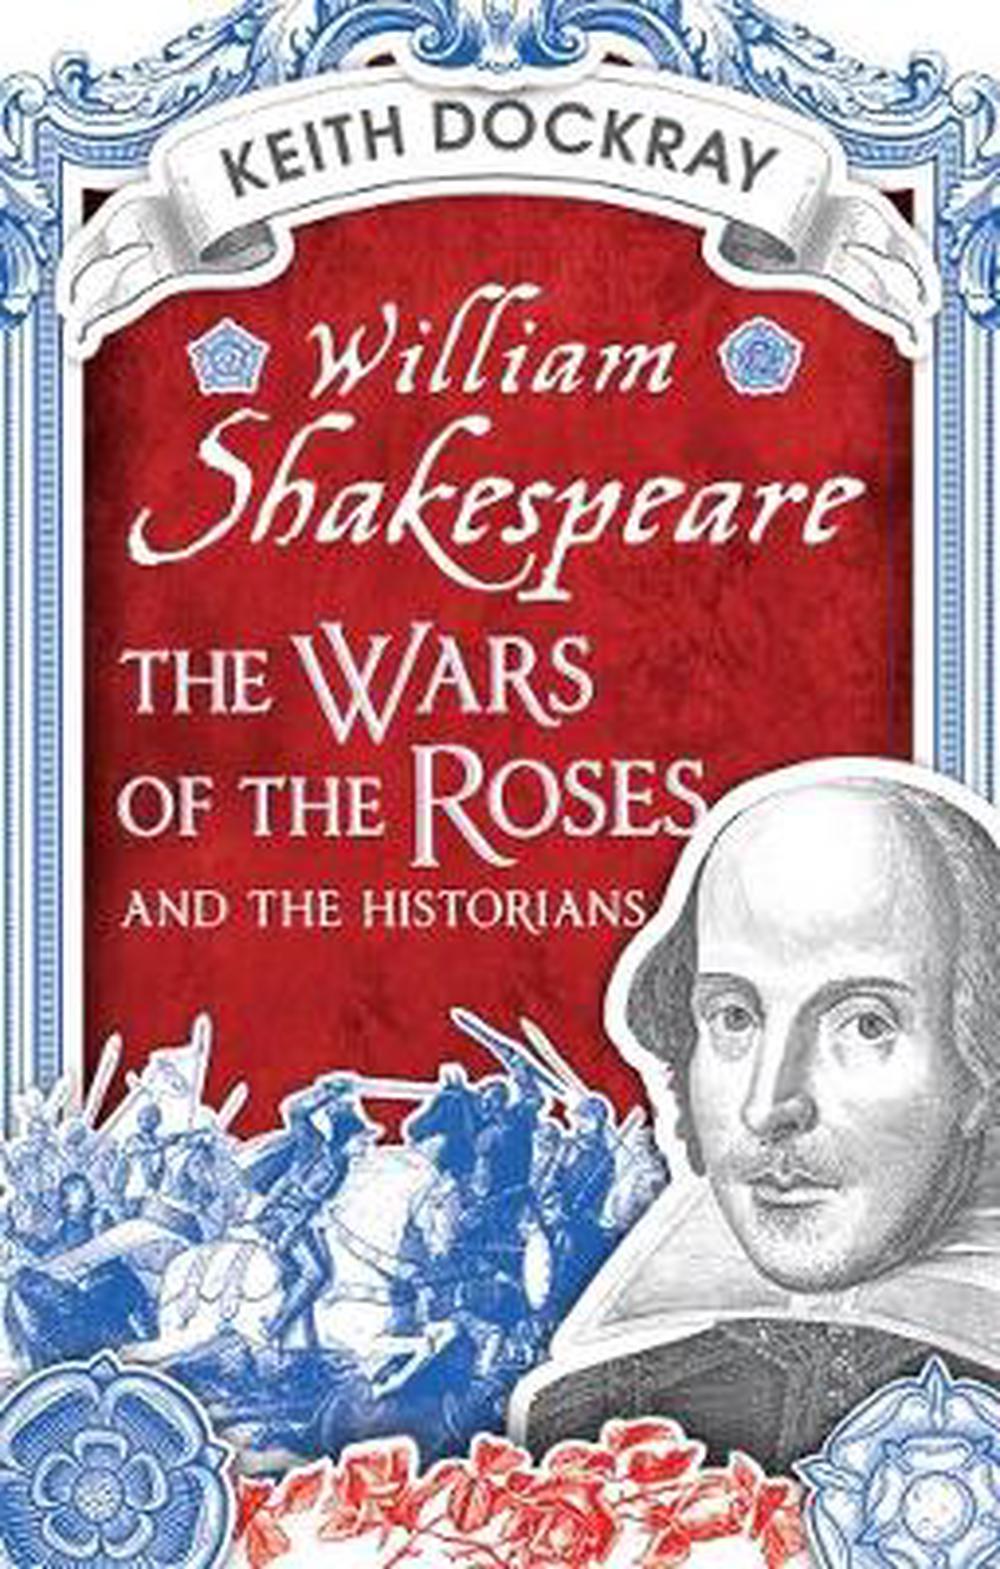 free download war of the roses shakespeare